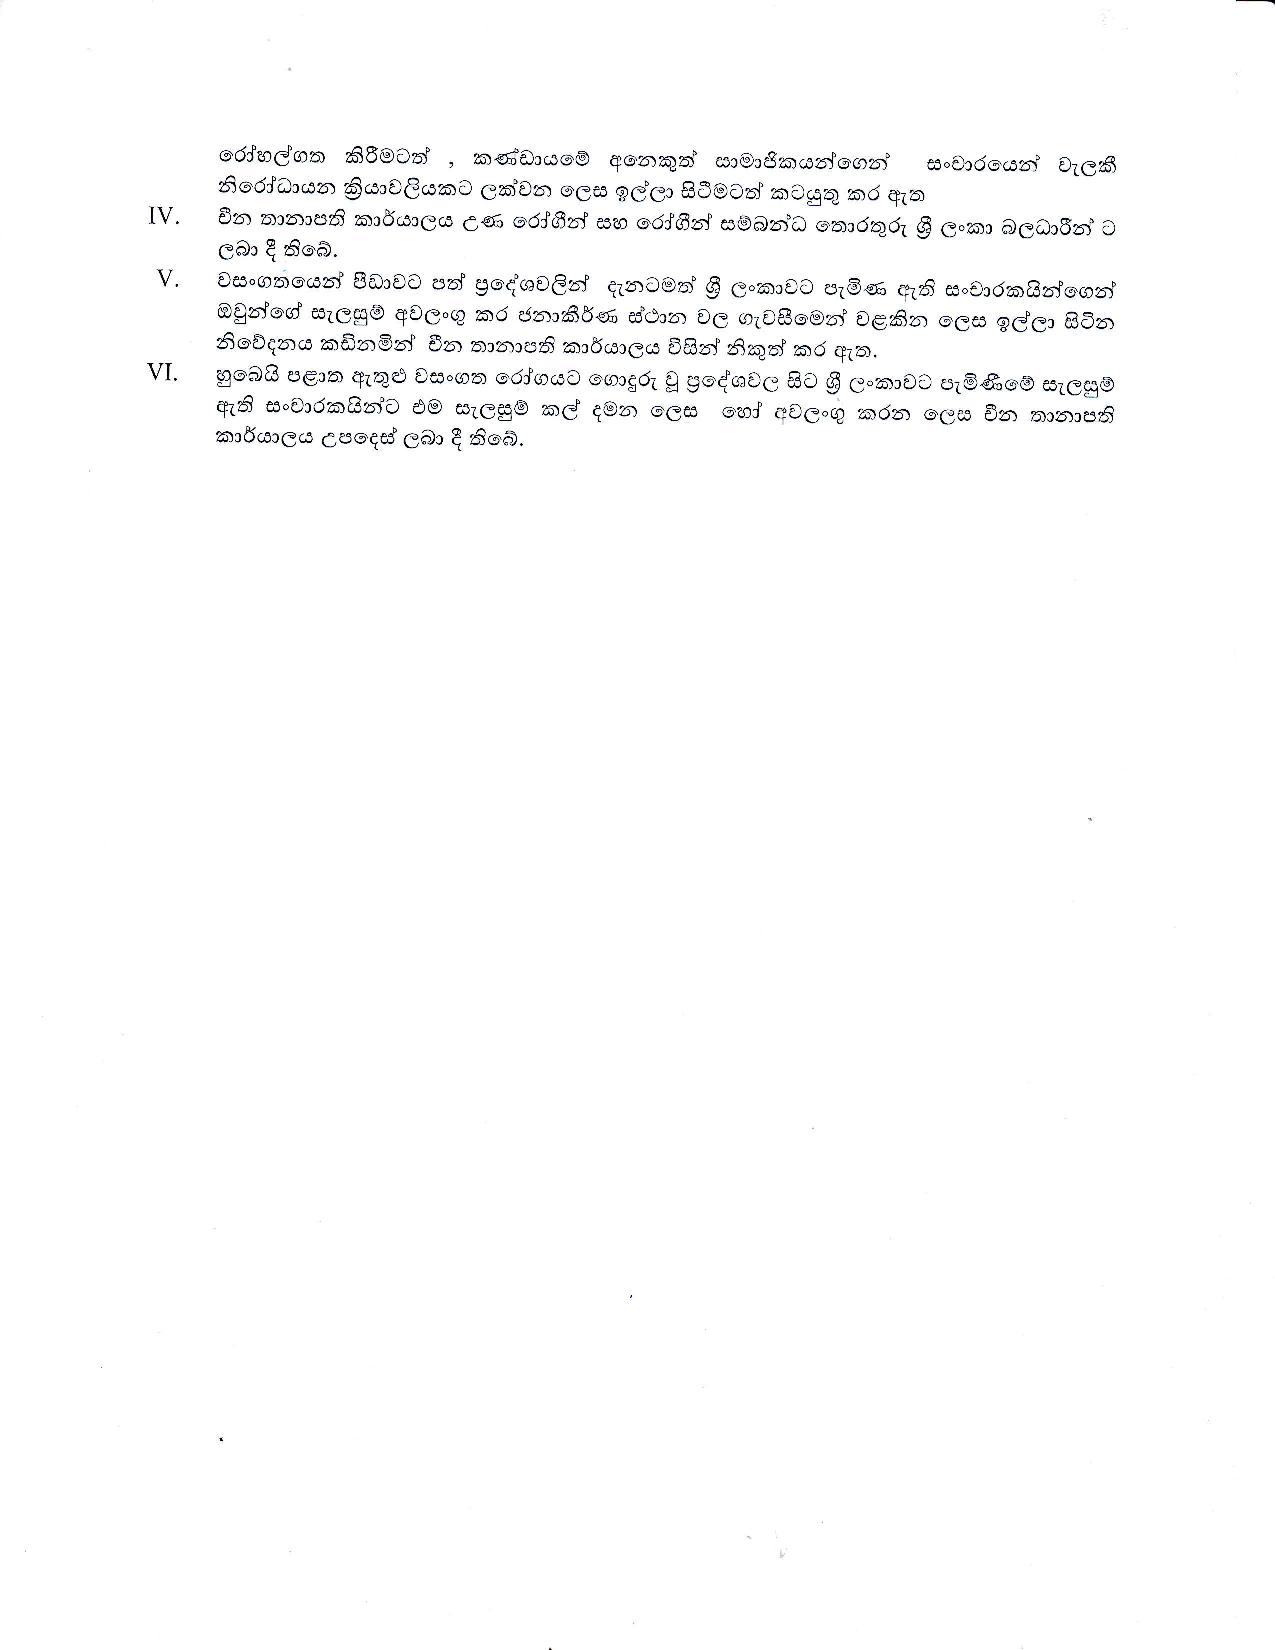 Embassy of China in Sri Lanka Explains the steps taken to prevent the spread of Coronavirus. 28.01 page 002